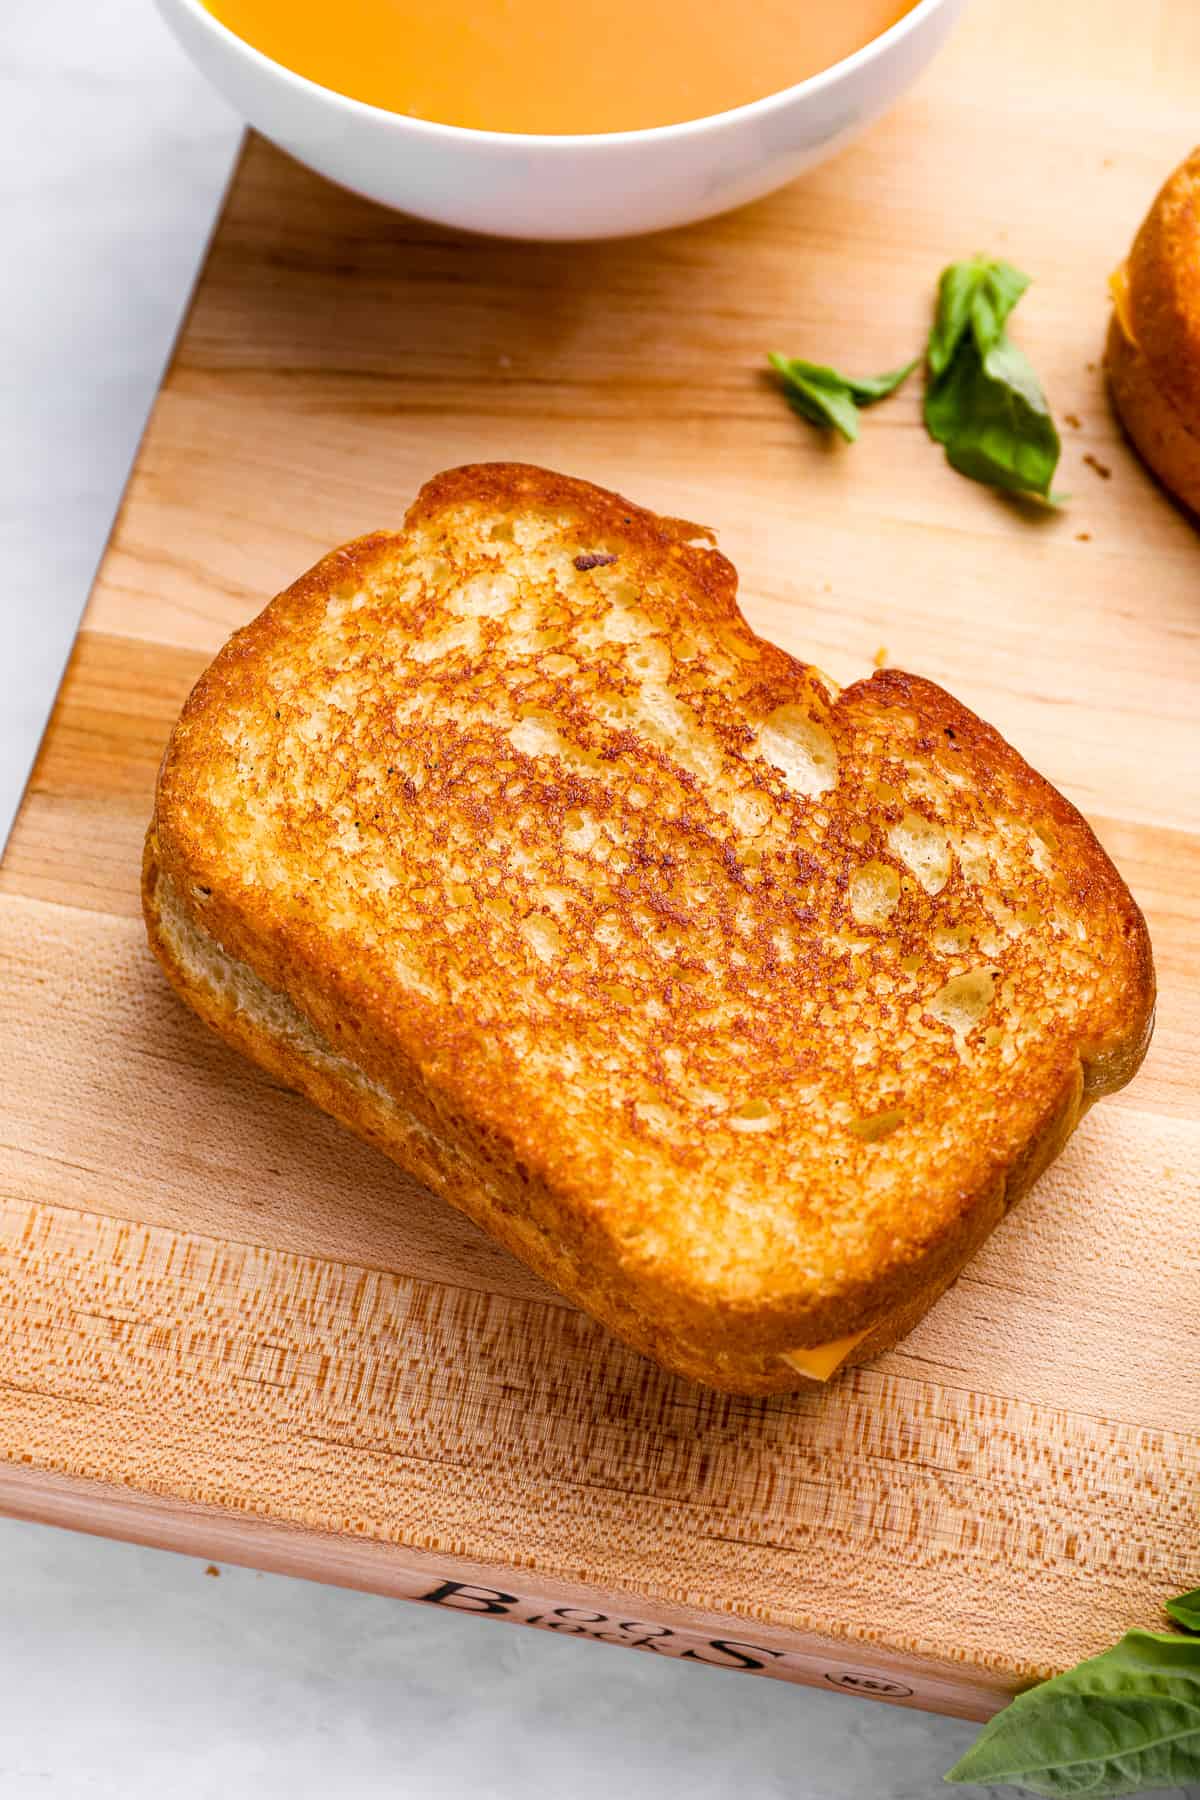 Grilled Cheese Recipe - The Cookie Rookie®